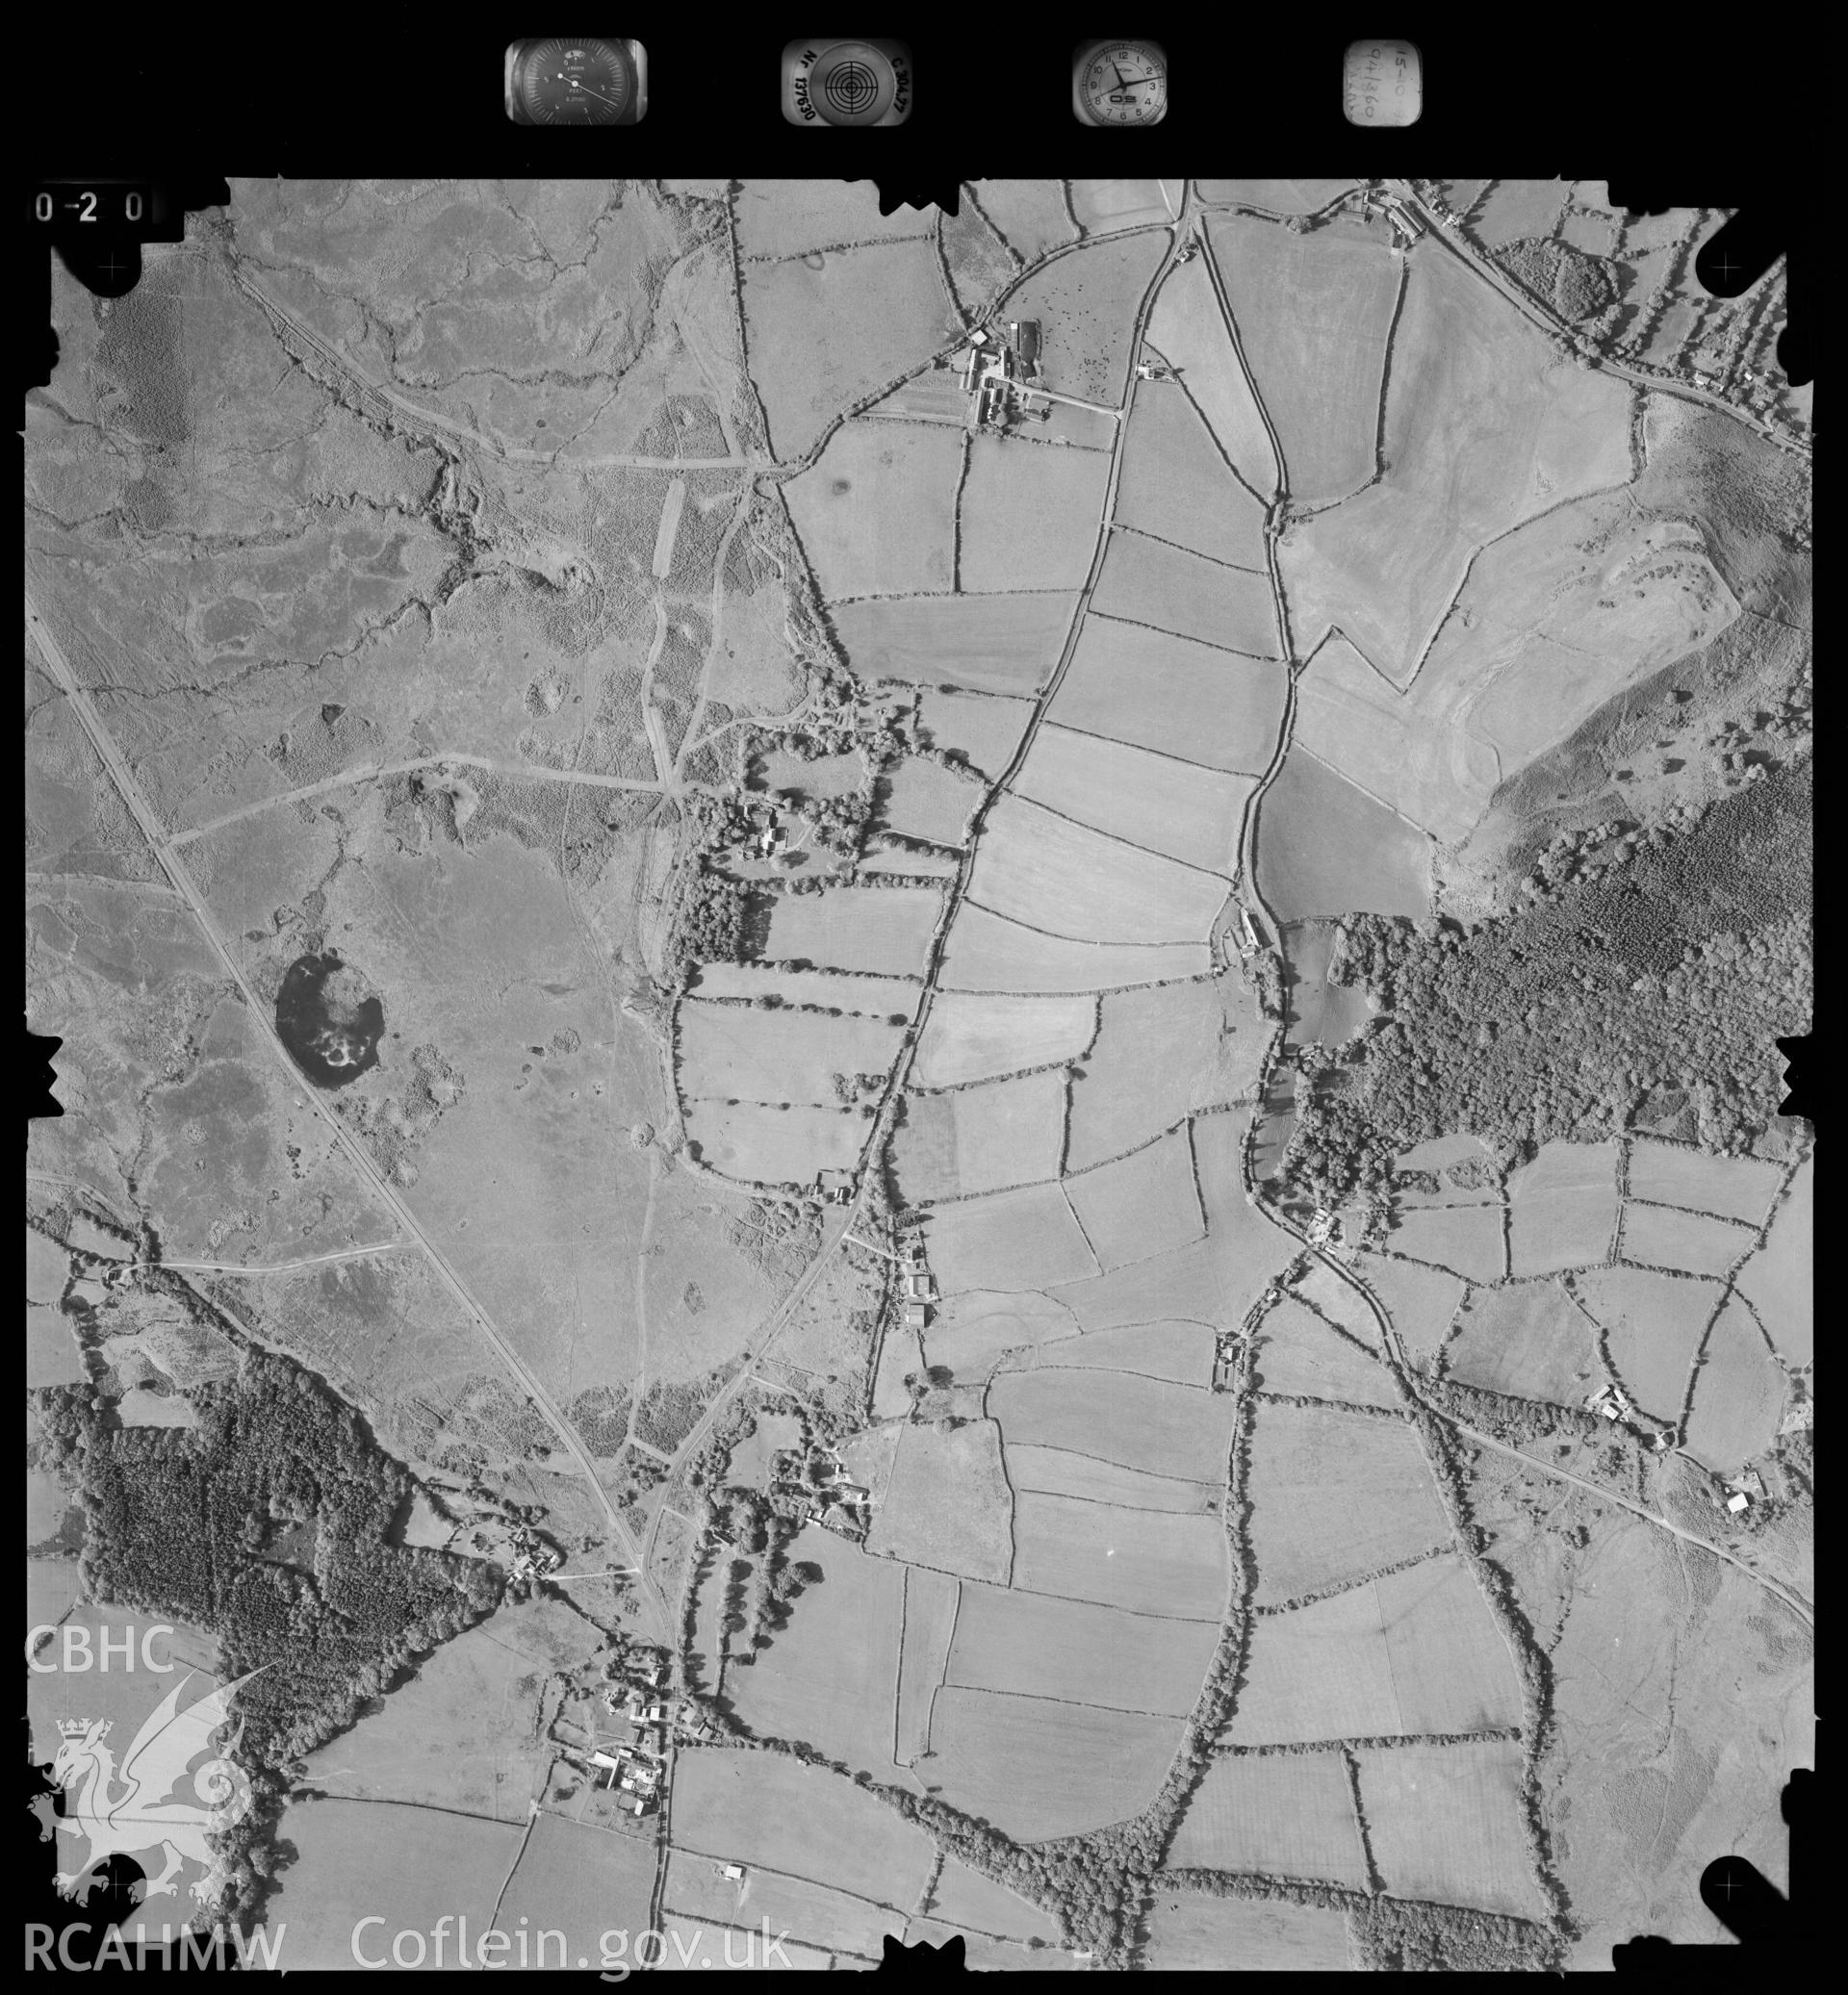 Digitized copy of an aerial photograph showing the Swansea area, taken by Ordnance Survey, 1994.